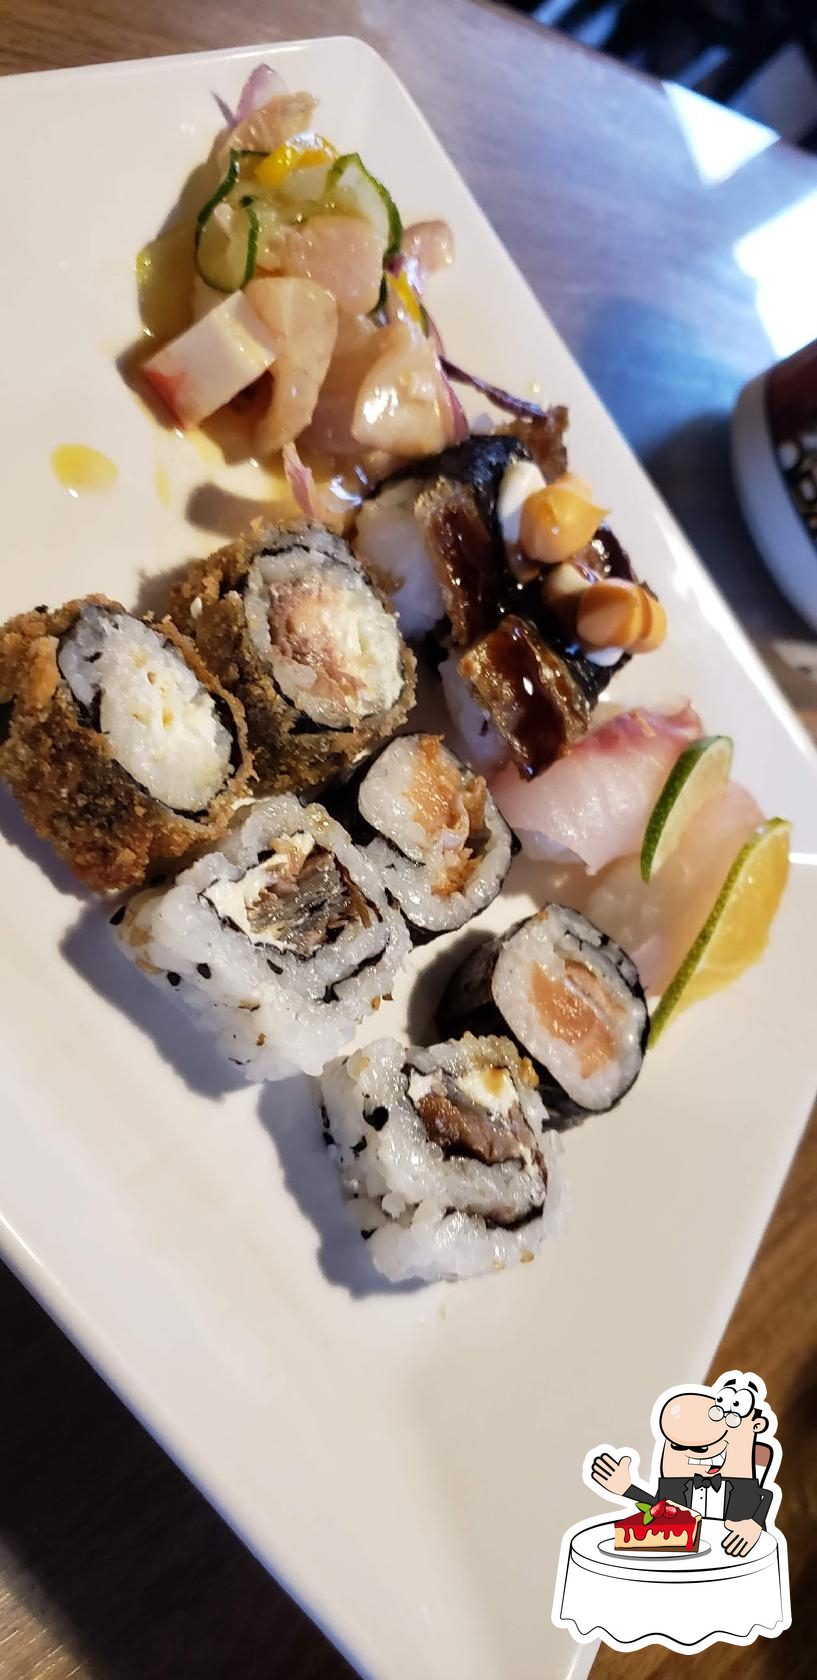 PAPA SUSHI  Joinville SC